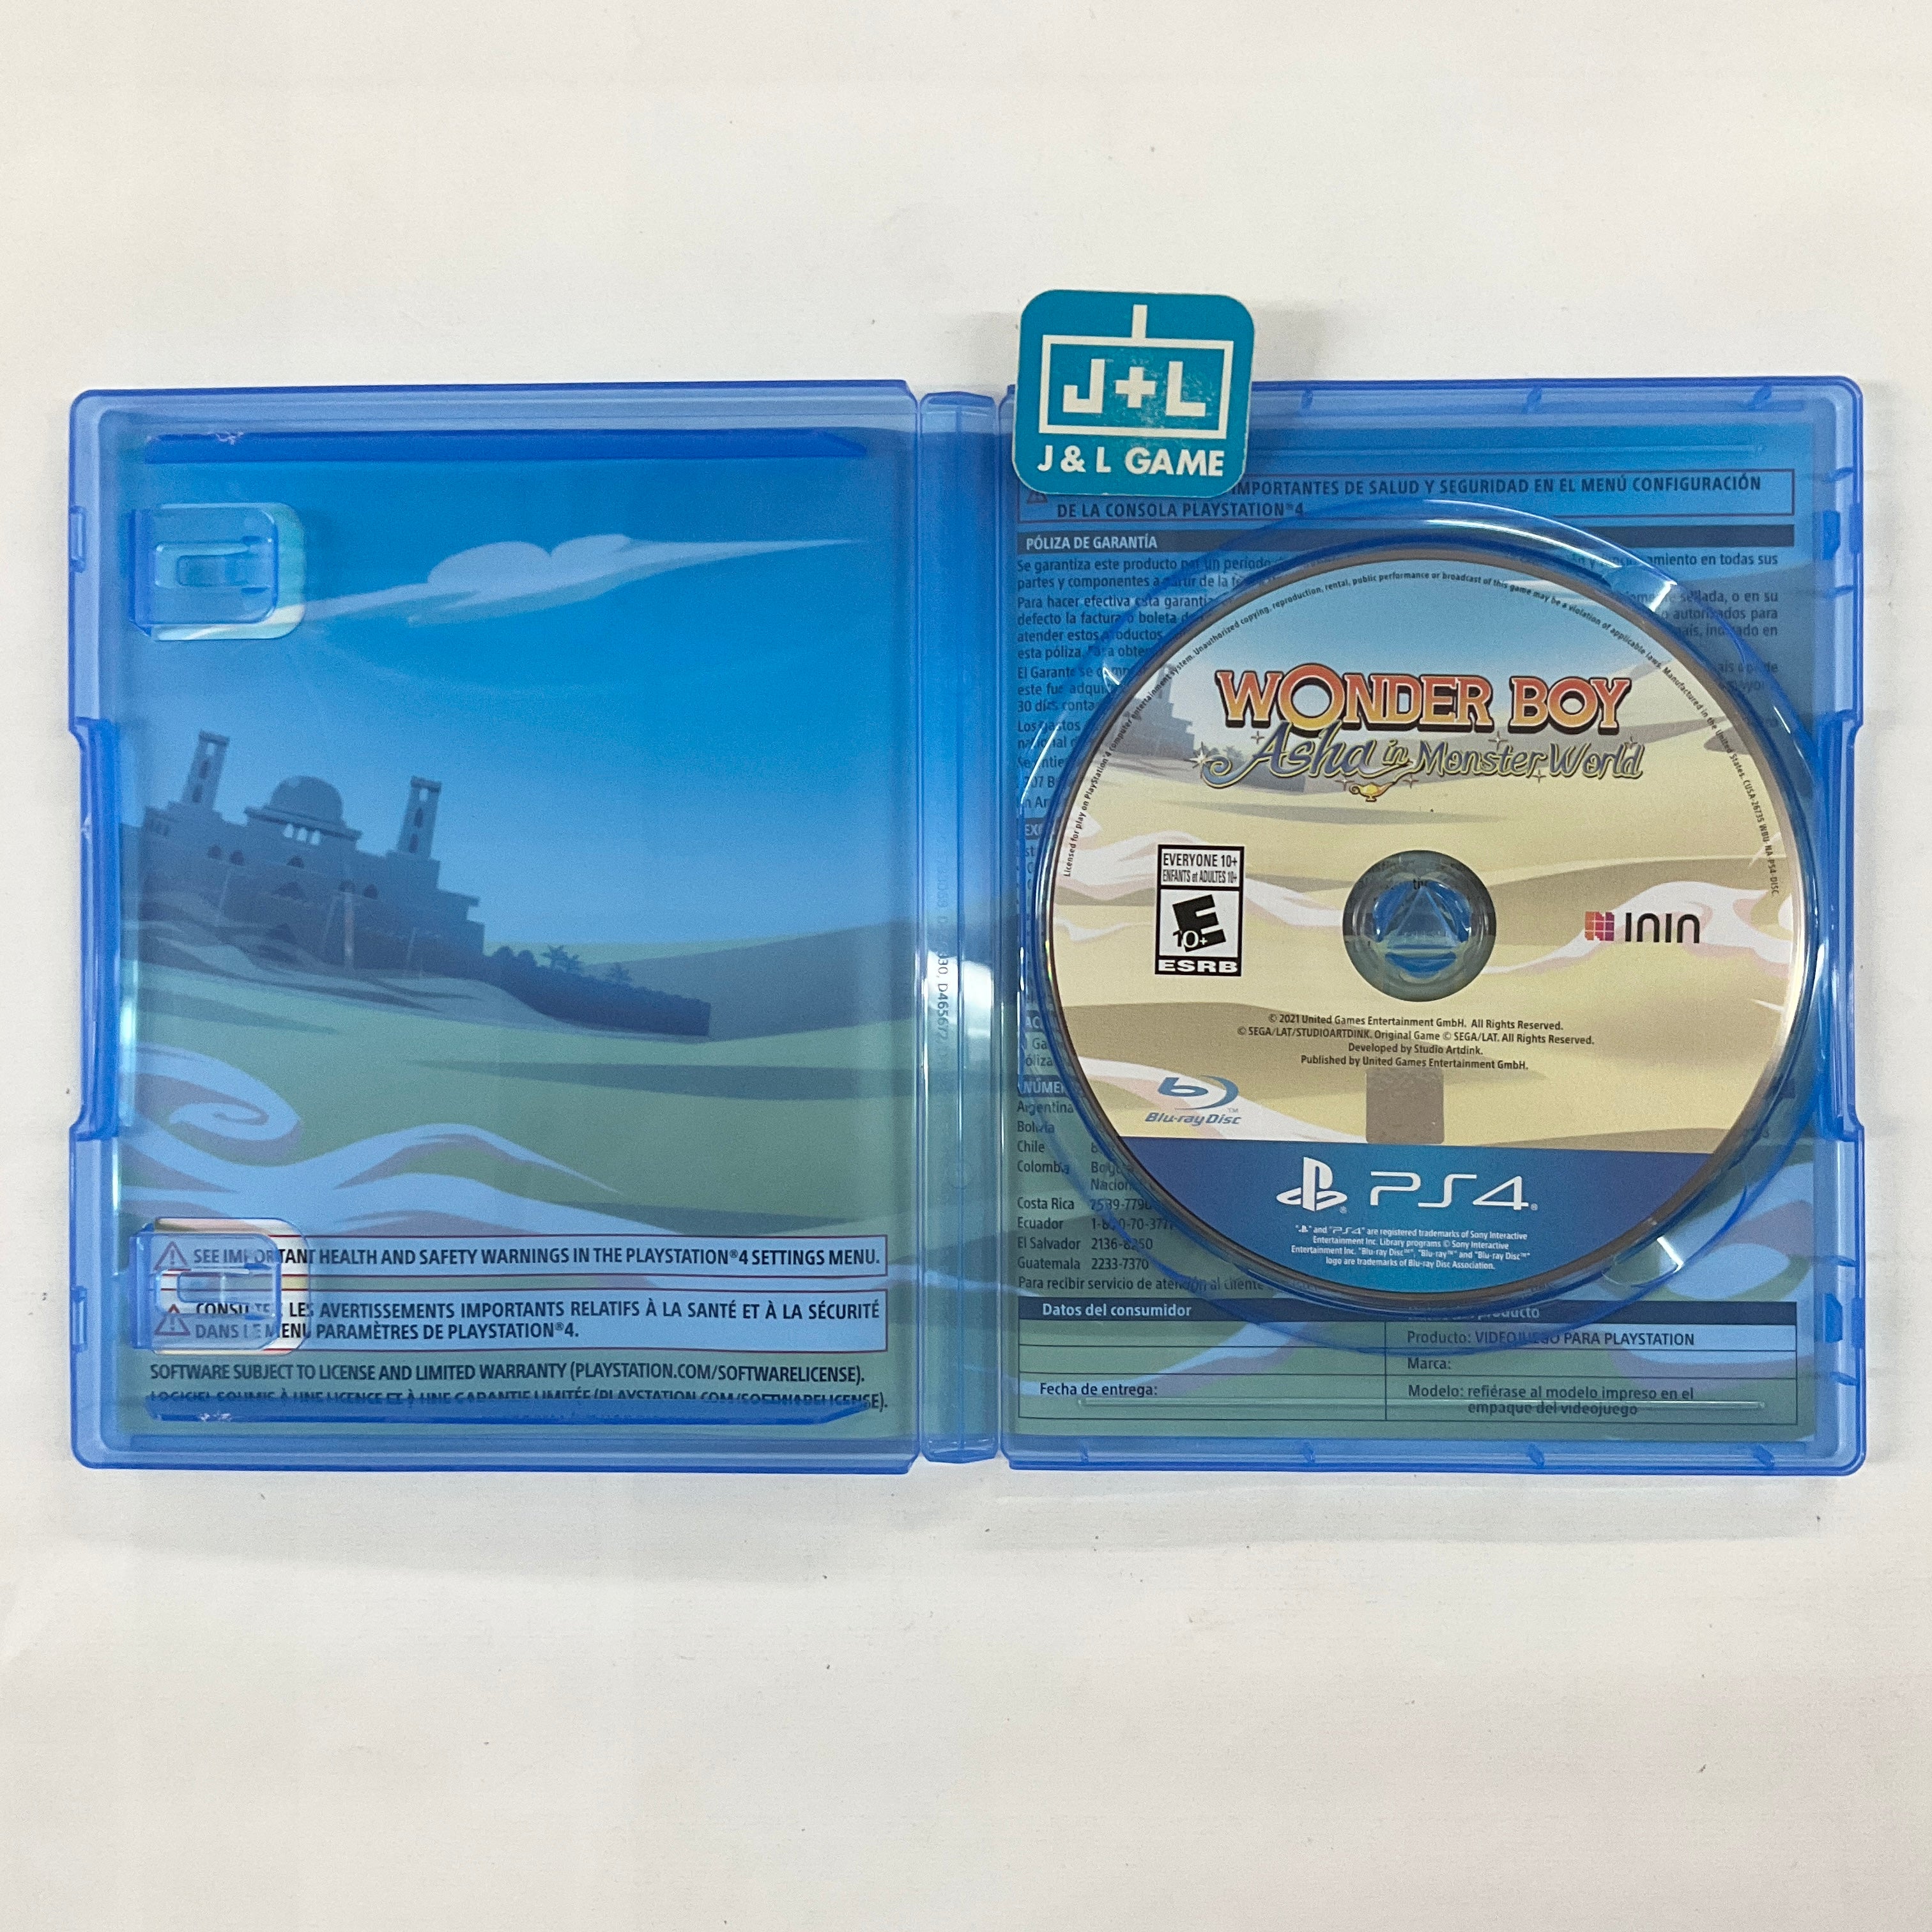 Wonder Boy - Asha In Monster World - (PS4) PlayStation 4 [Pre-Owned] Video Games ININ   